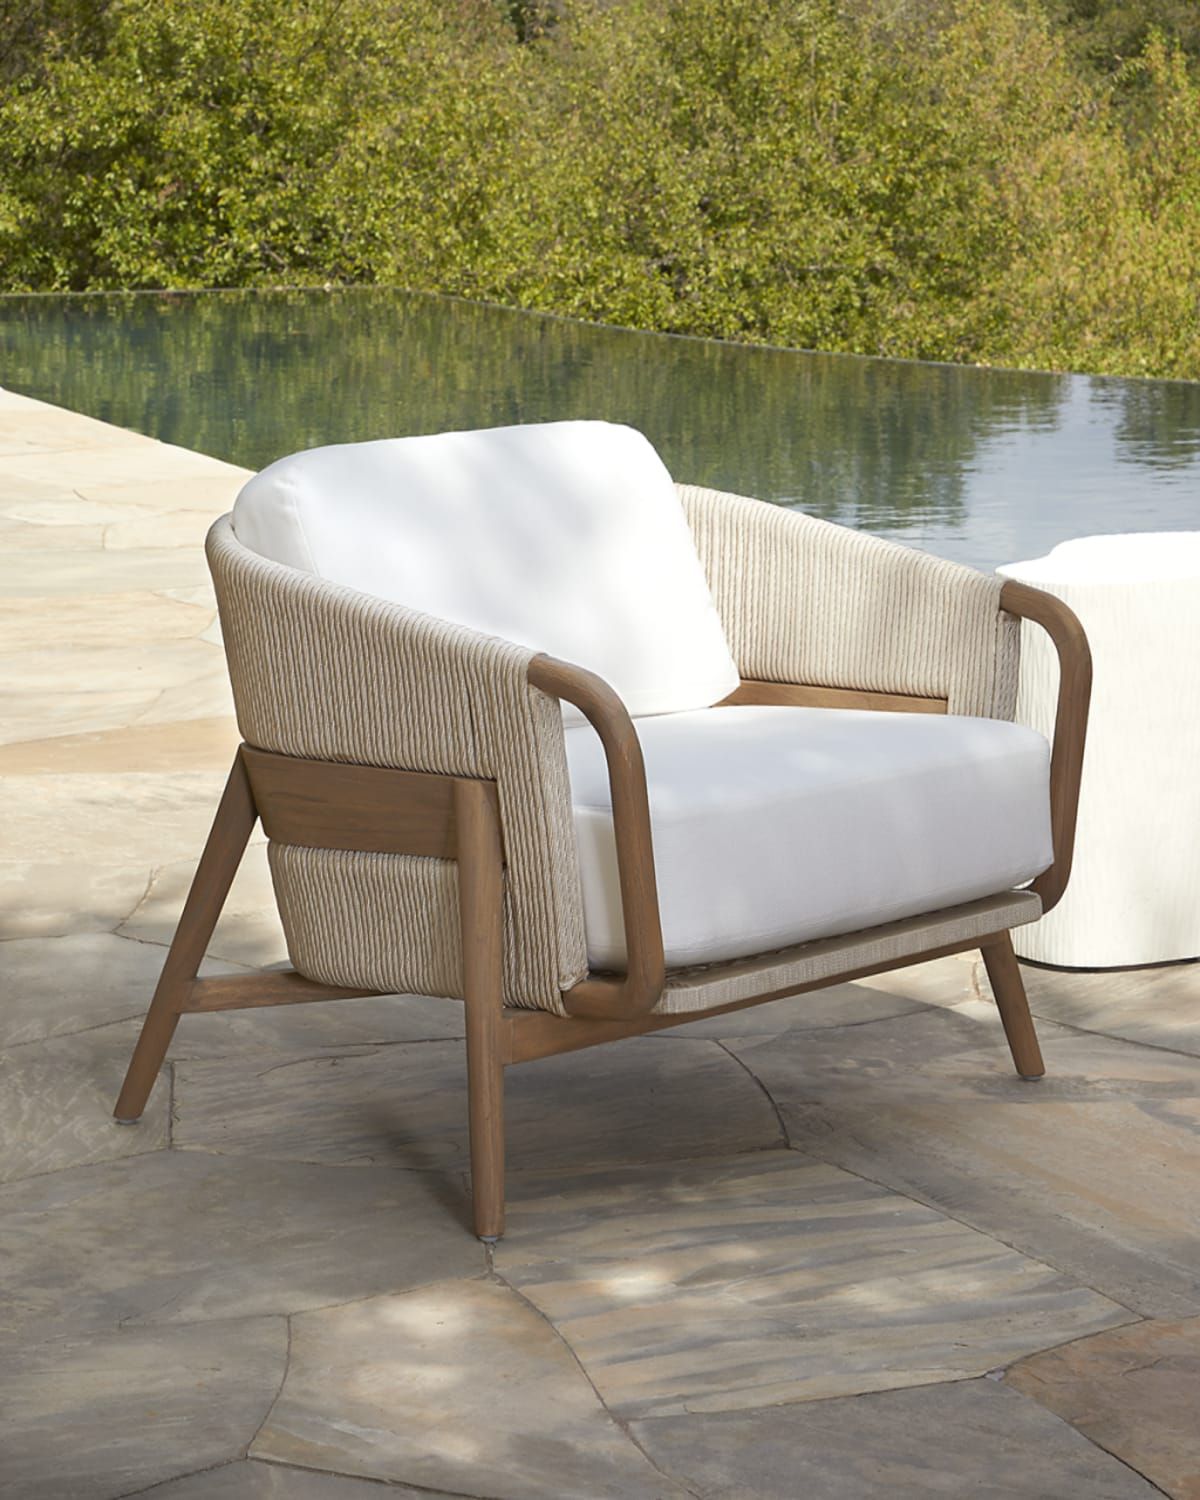 The Beauty of Teak Furniture for Outdoor Living